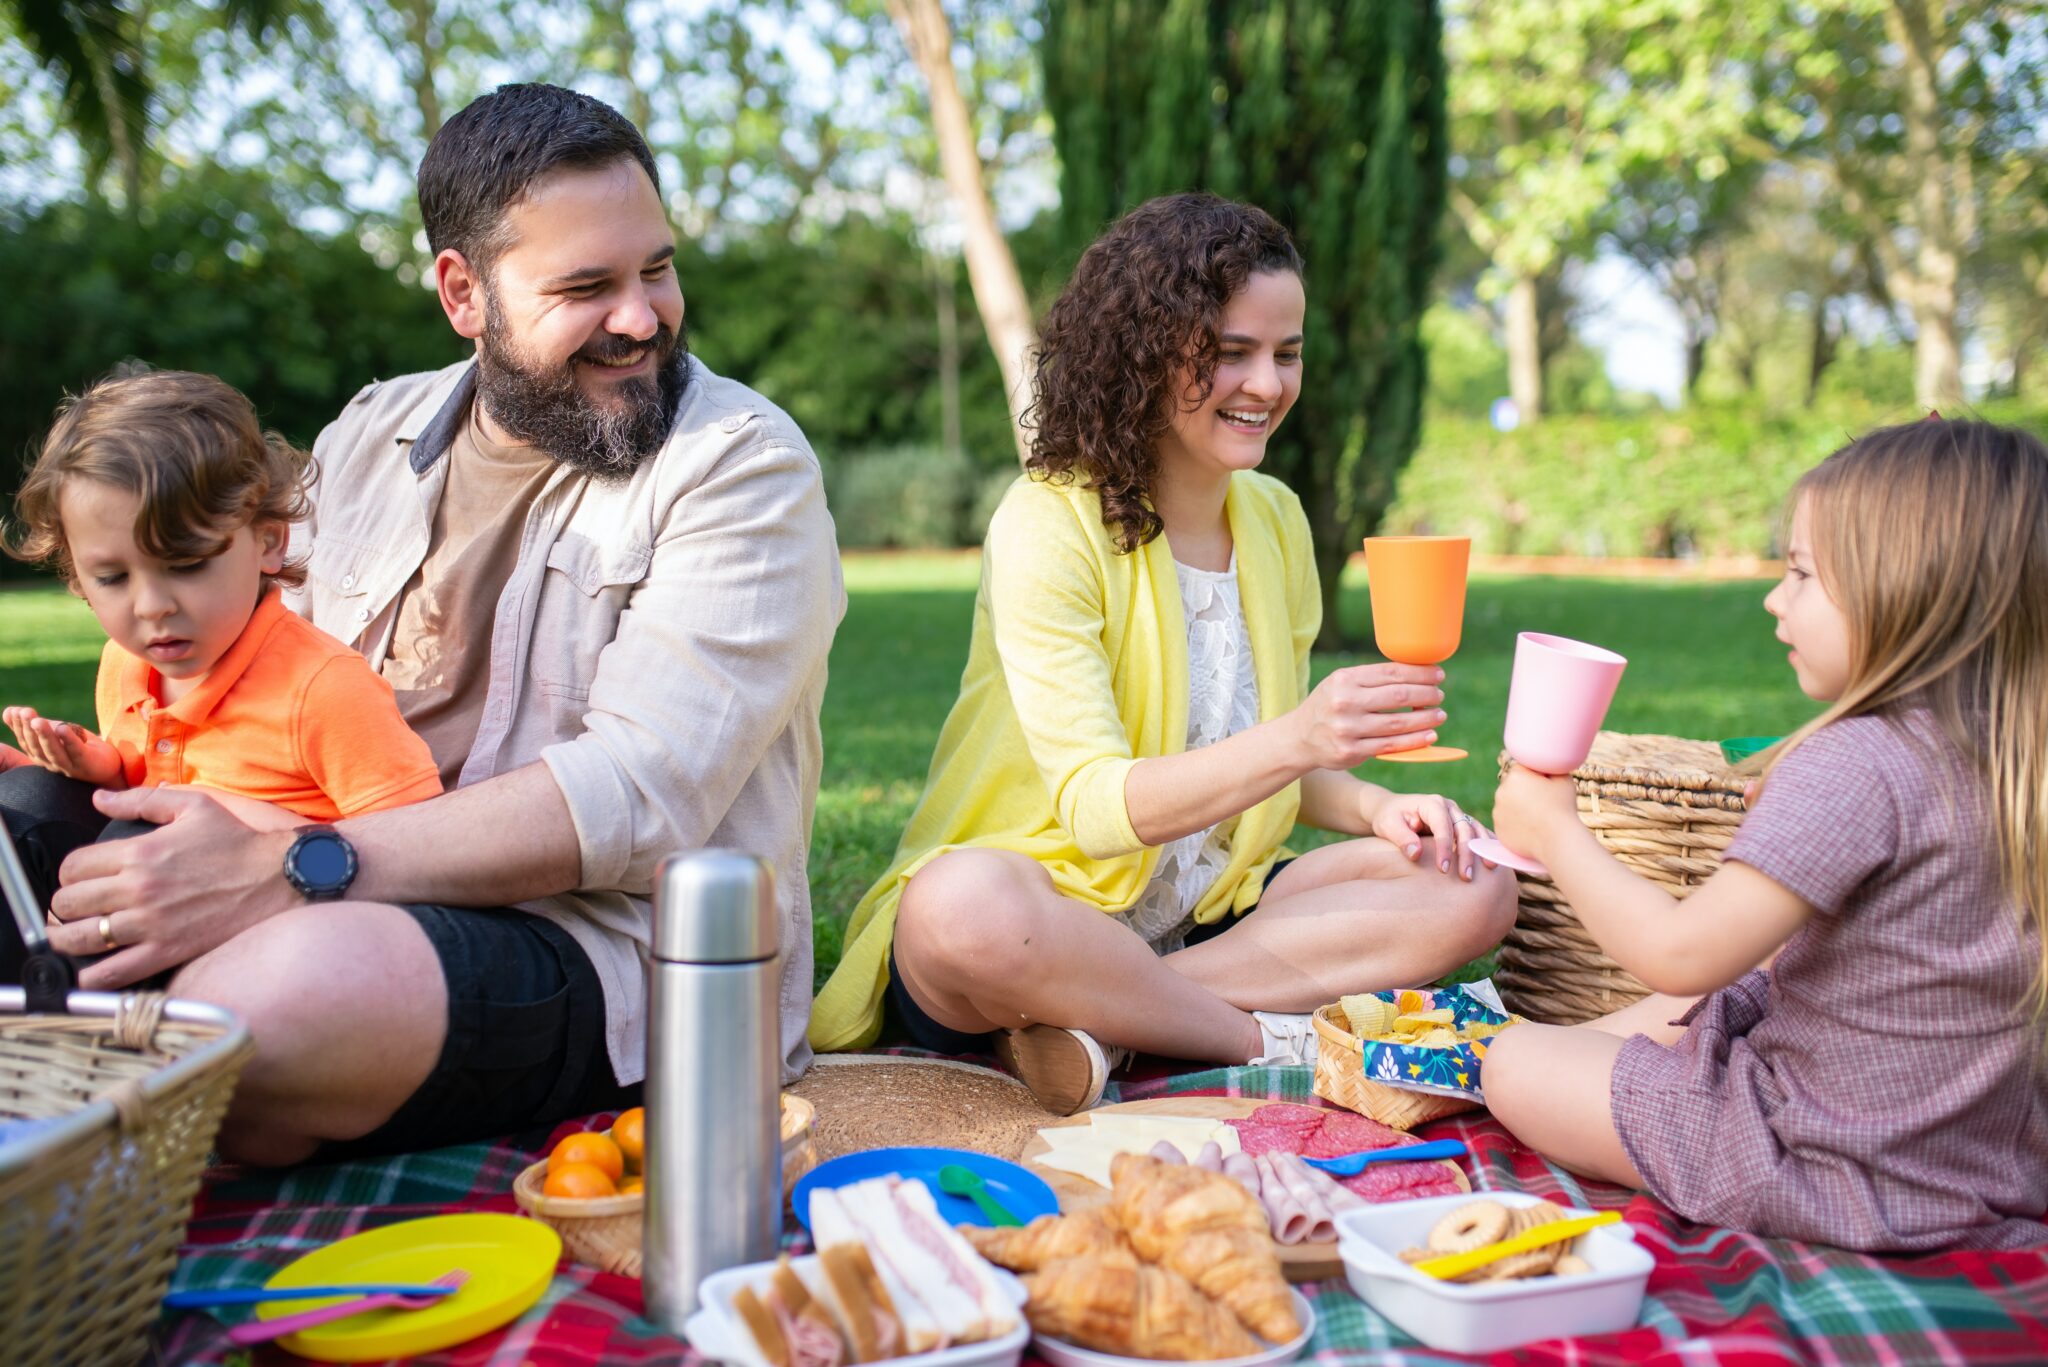 picnic Bonding With Your Family